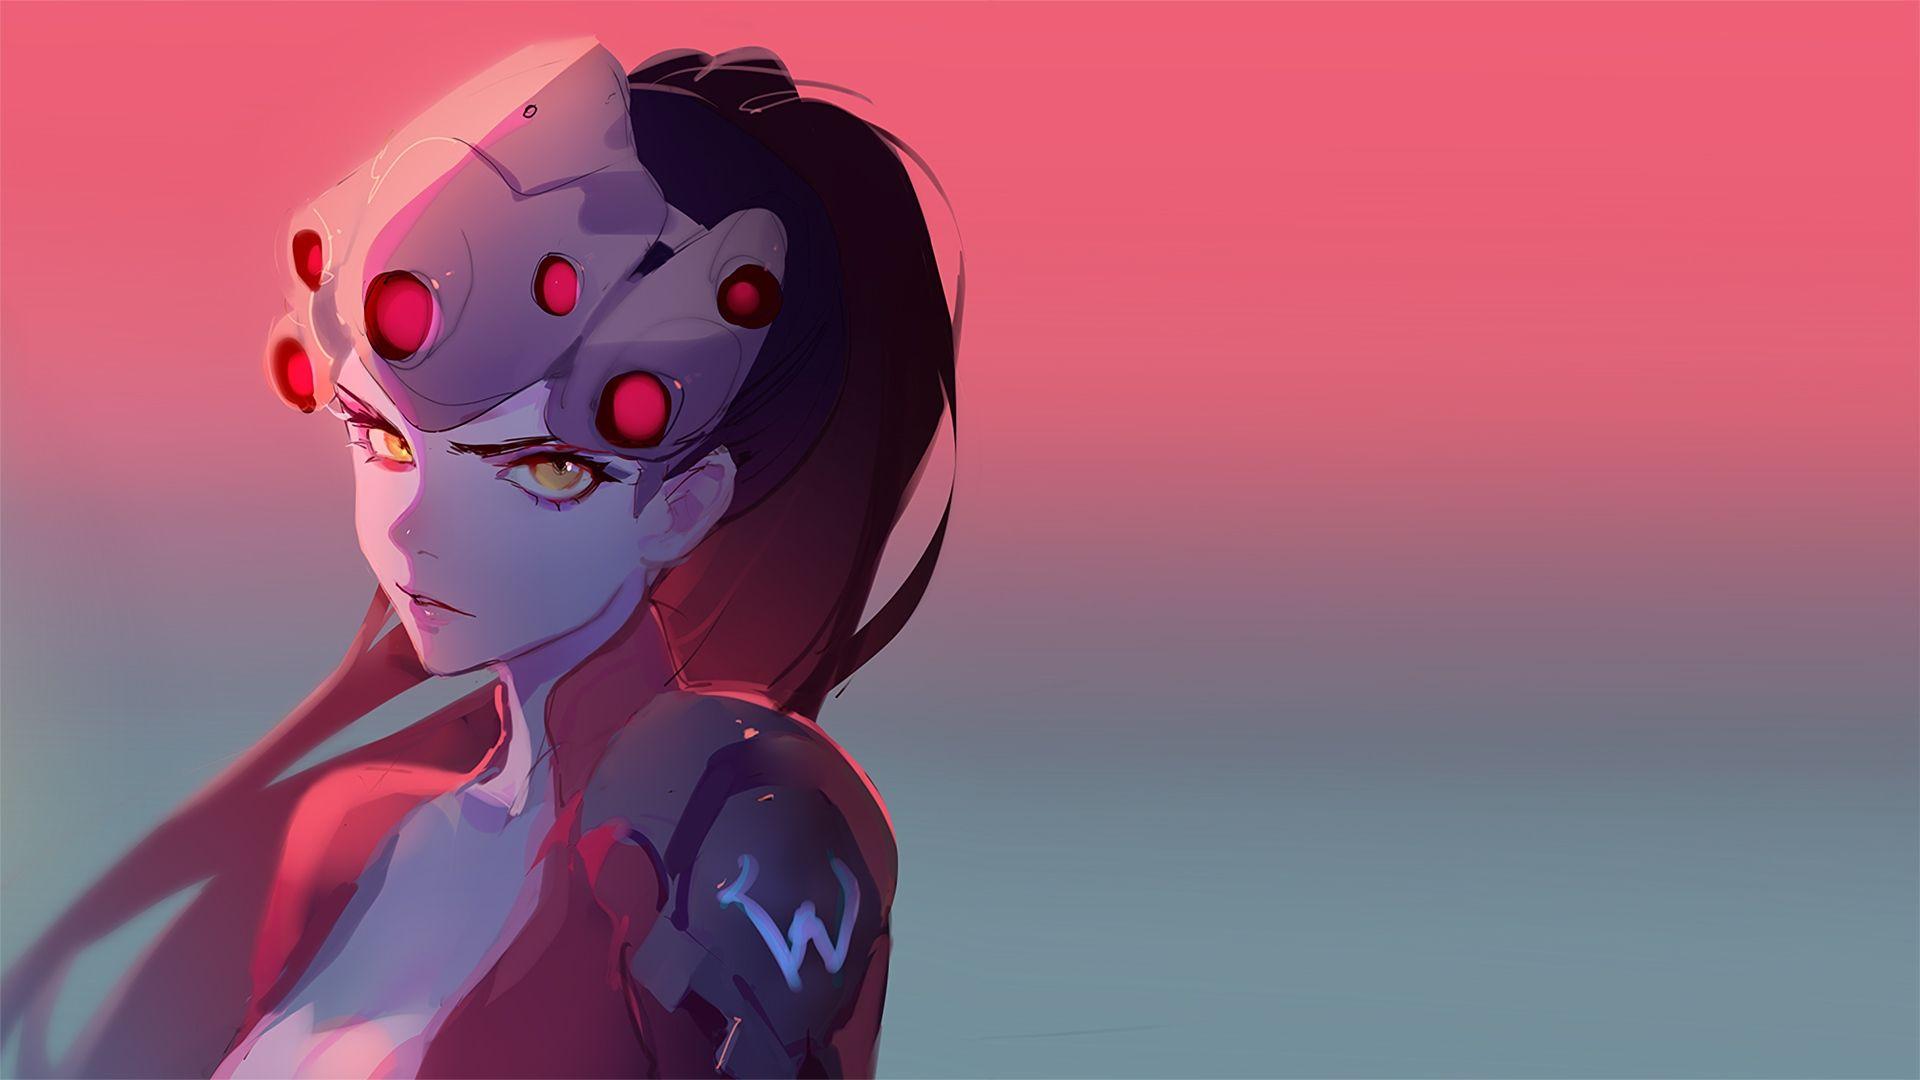 Awesome Widowmaker Overwatch Game 1920x1080 wallpaper. Overwatch